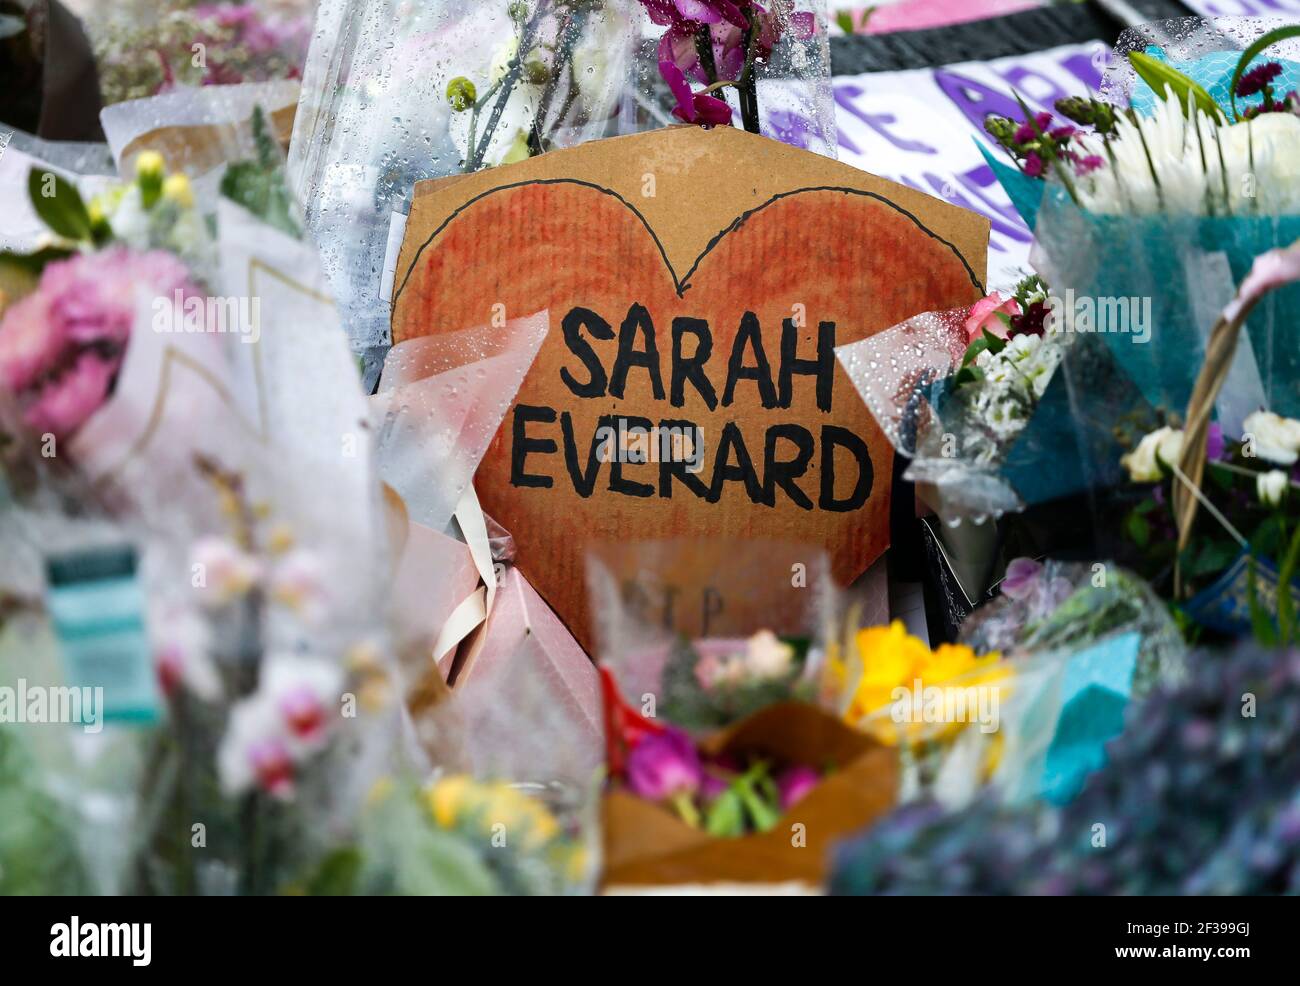 London, UK. 15th Mar, 2021. Flowers and a note are seen as people pay tributes at the bandstand on Clapham Common to mourn for Sarah Everard in London, Britain, on March 15, 2021. A serving Metropolitan police officer on March 13 appeared in court in London after being charged with the kidnap and murder of a 33-year-old woman. Wayne Couzens, 48, was arrested after Sarah Everard, a marketing executive, went missing while walking home from a friend's apartment in south London on March 3. Credit: Xinhua/Alamy Live News Stock Photo